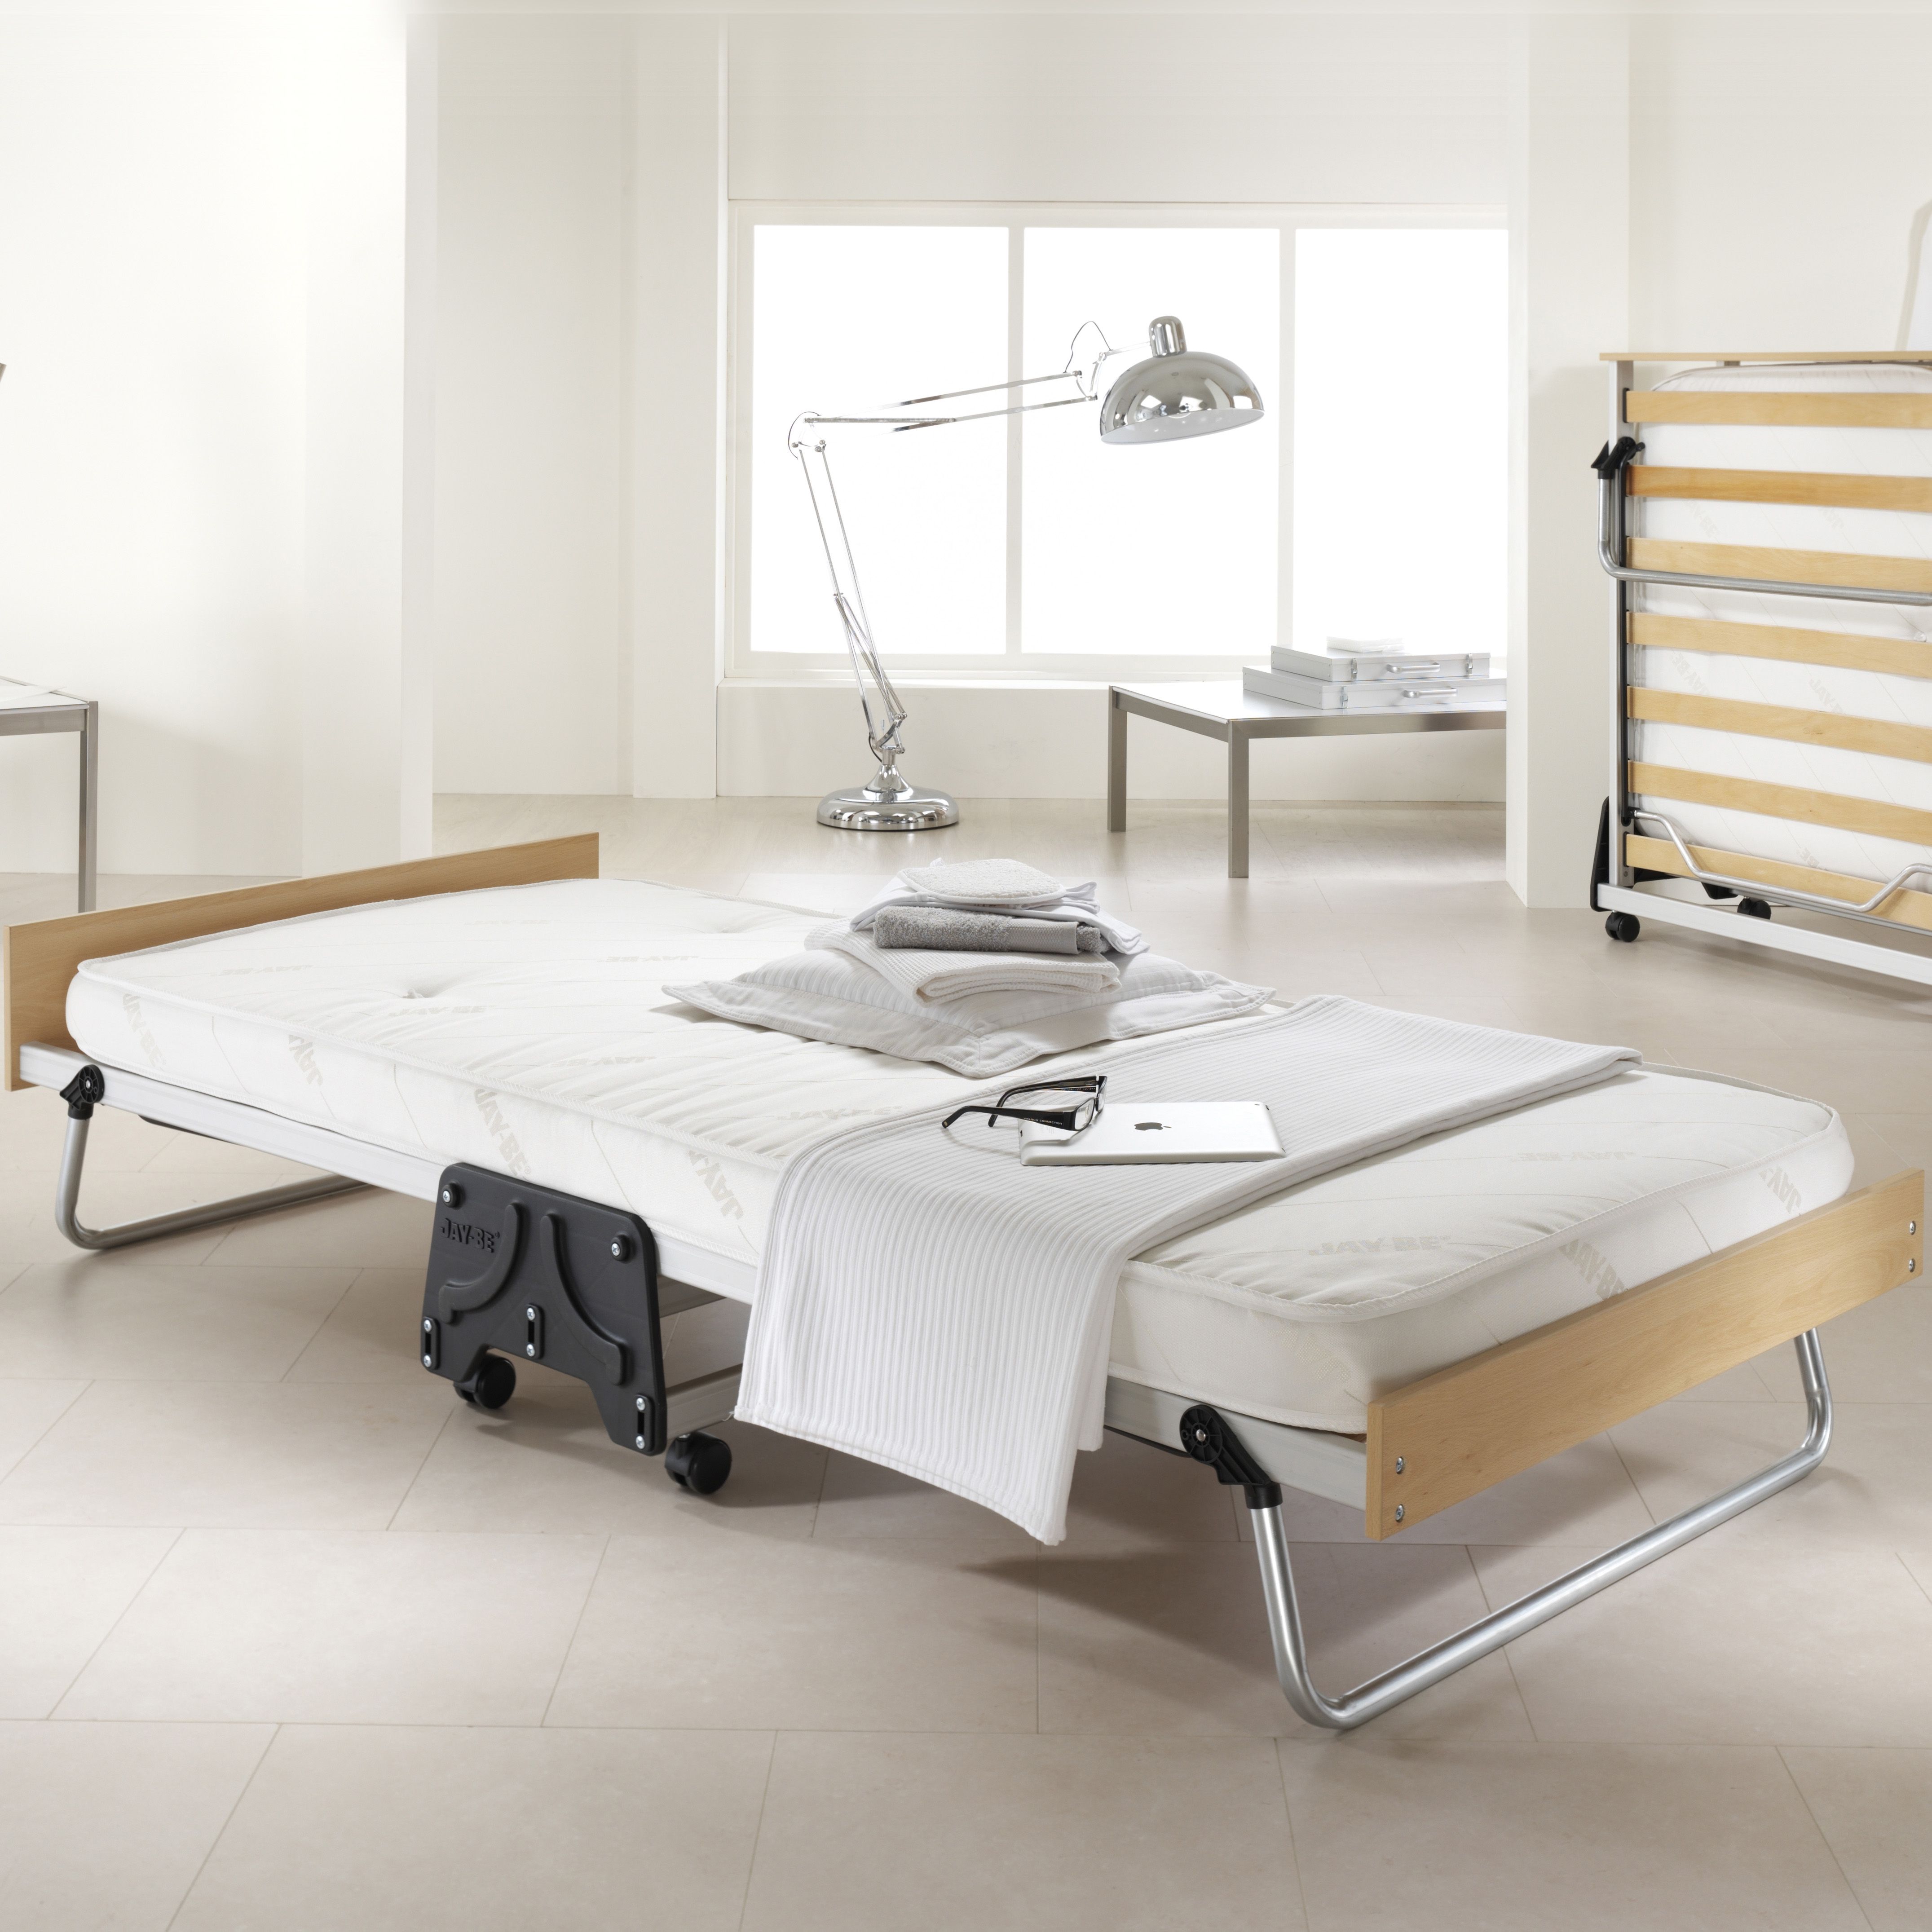 Jay-Be J-Bed Single Foldable Guest bed with Airflow mattress